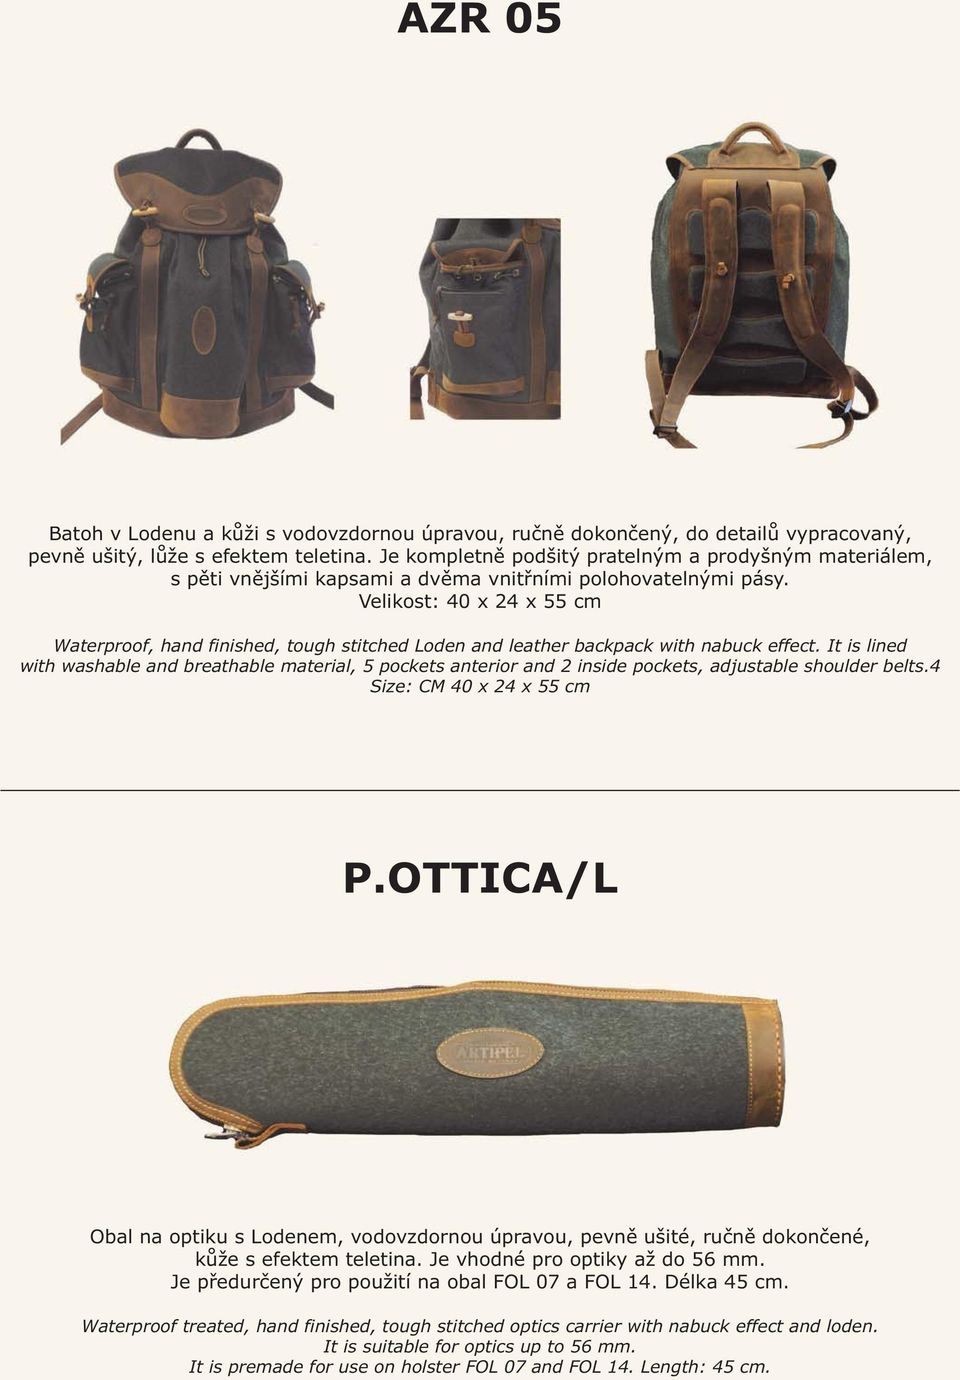 Velikost: 40 x 24 x 55 cm Waterproof, hand finished, tough stitched Loden and leather backpack with nabuck effect.